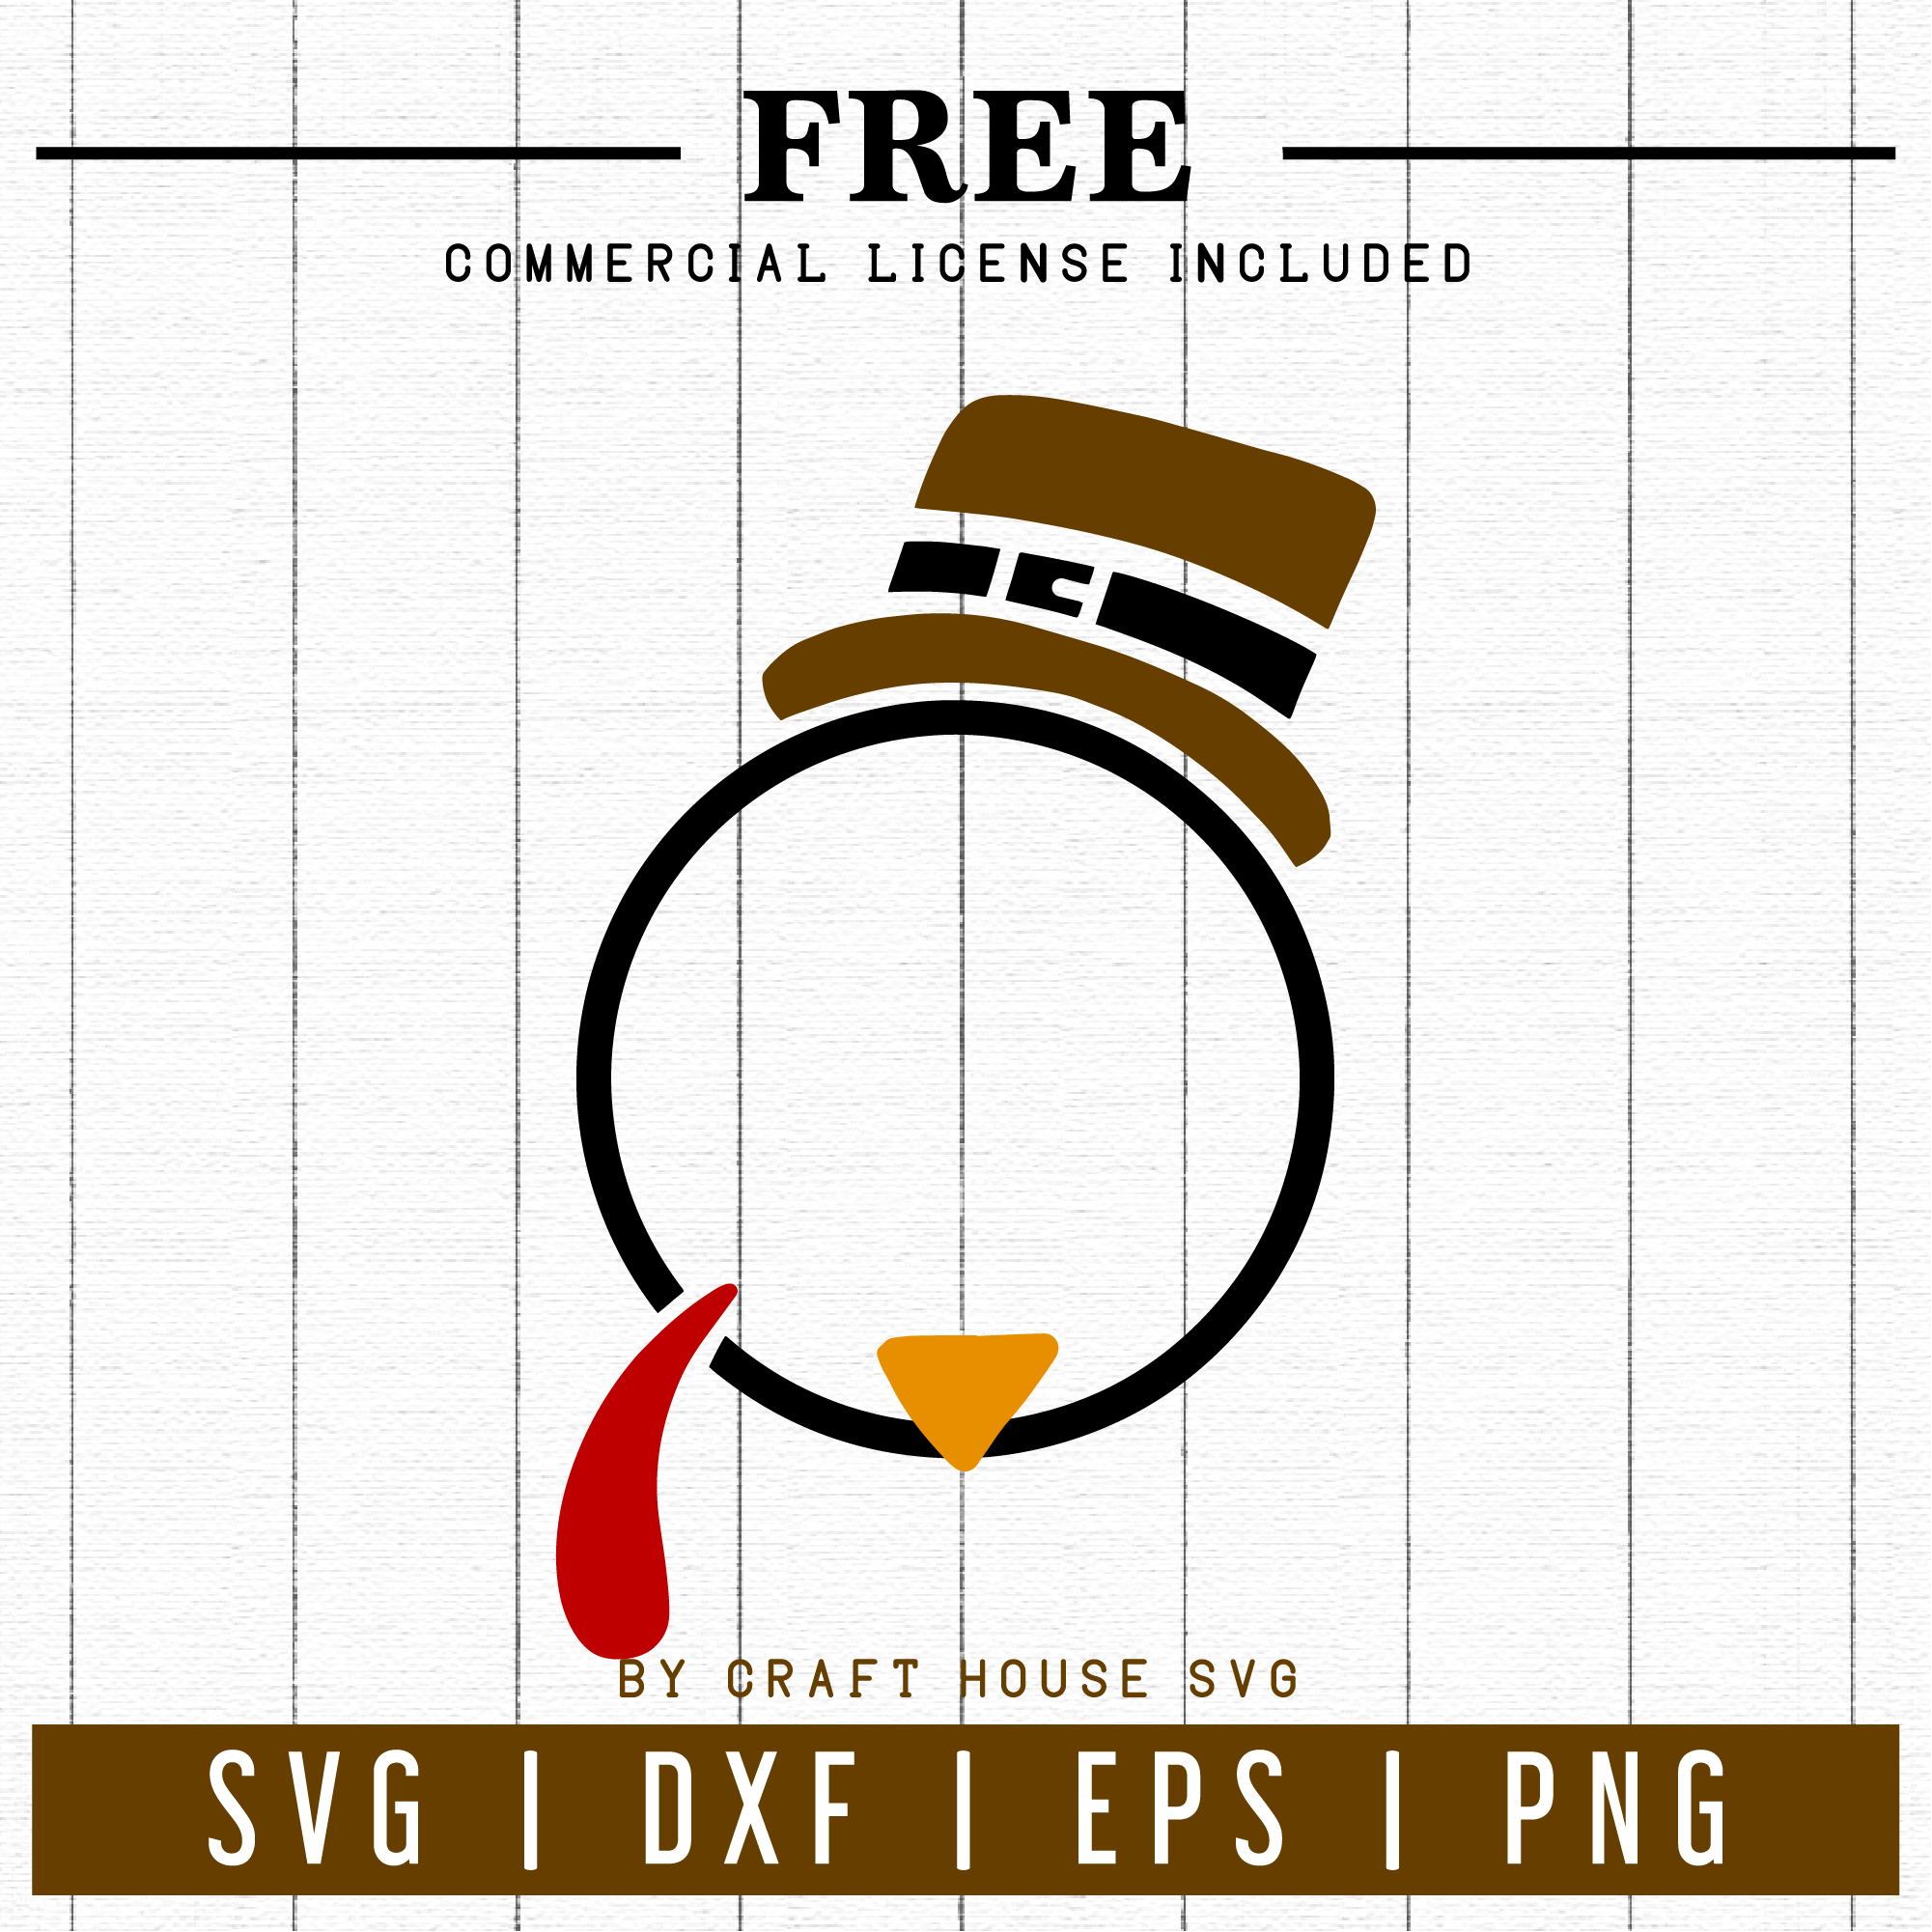 FREE | Thanksgiving Monogram Frame SVG | FB39 Craft House SVG - SVG files for Cricut and Silhouette